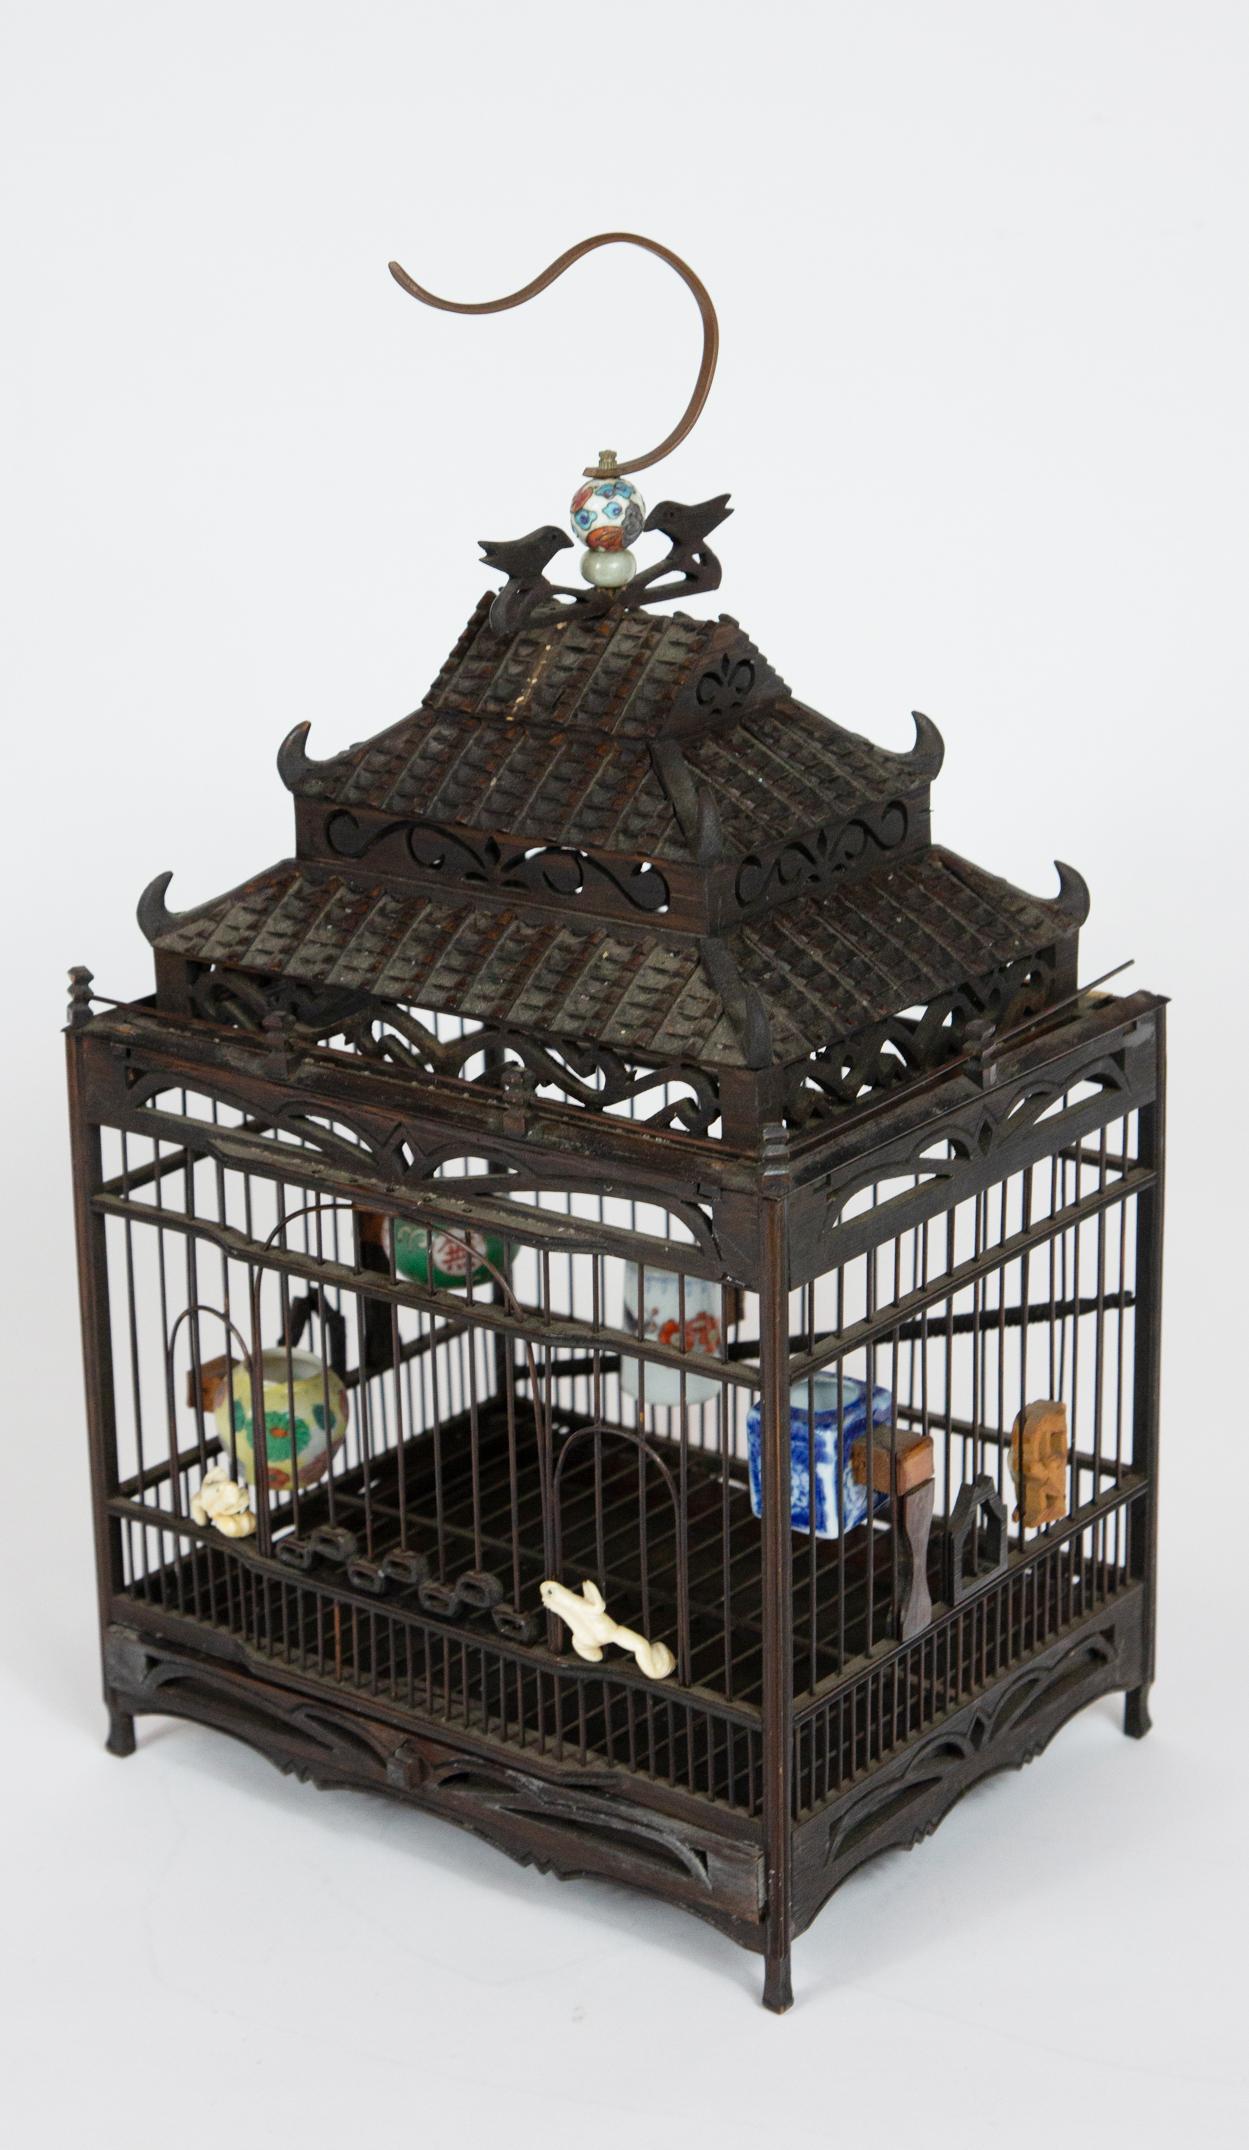 Carved open work wooden birdcage with tiered pagoda roof and miniature porcelain vessels.

Measures: 9